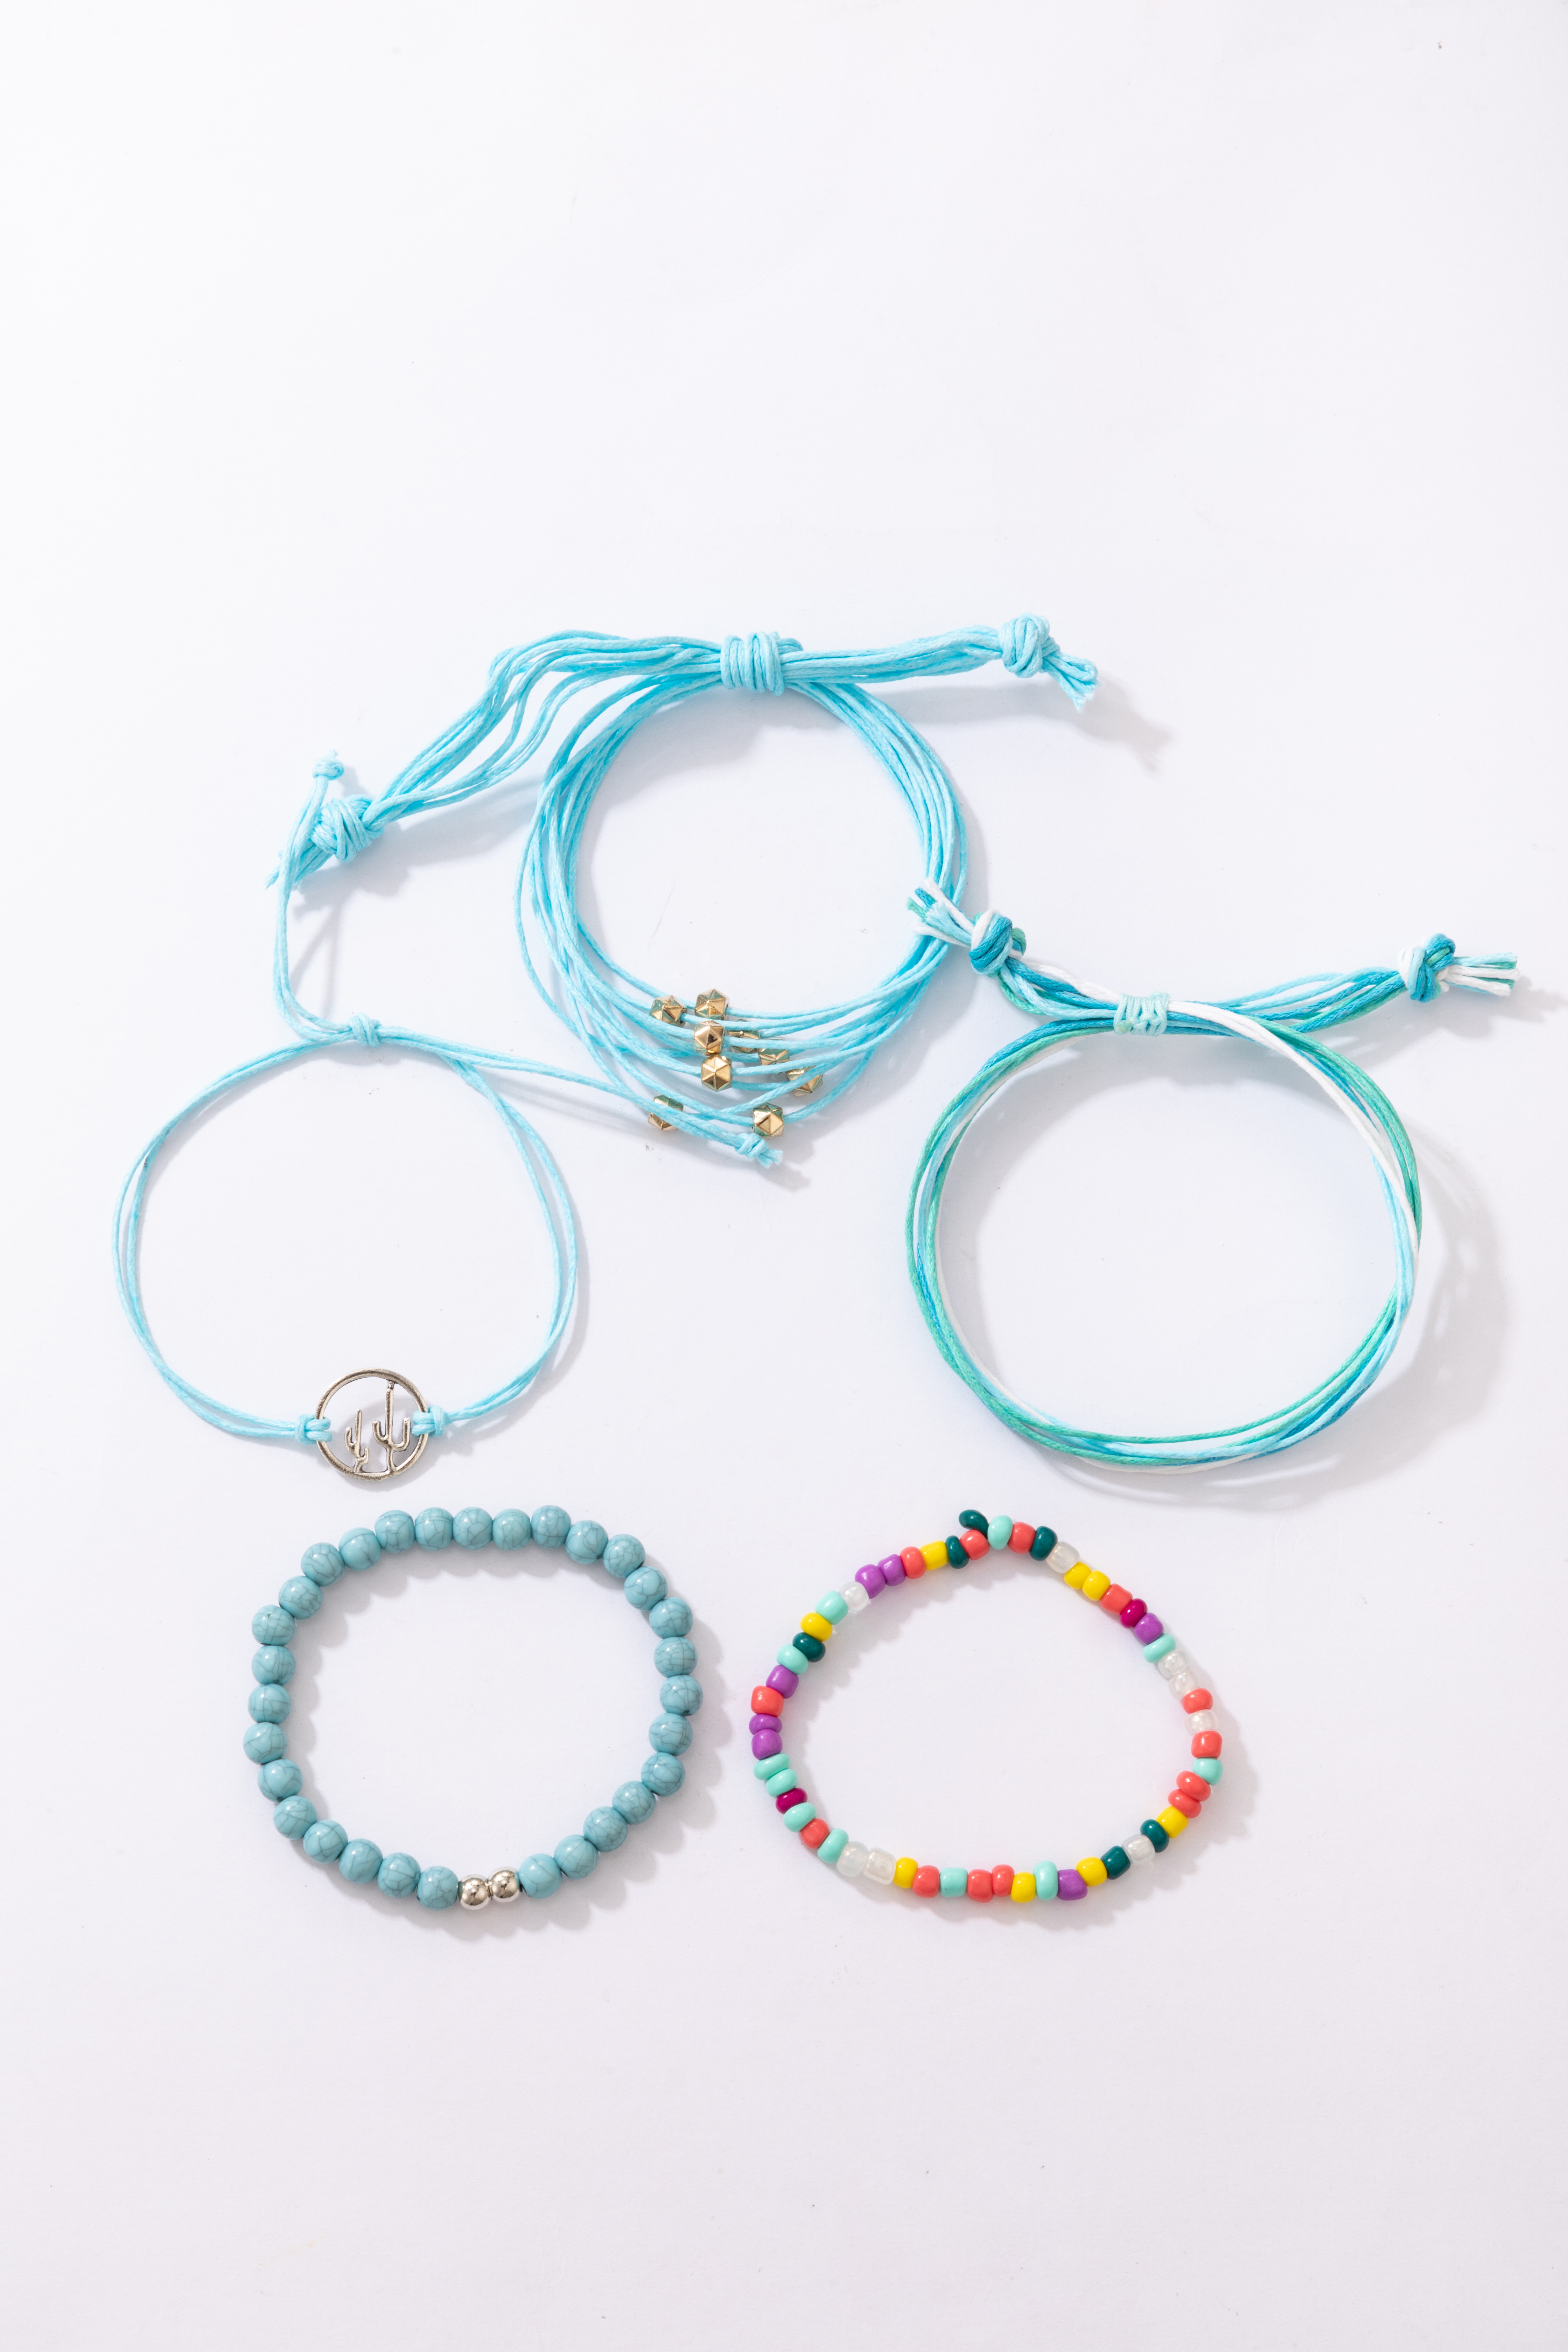 new jewelry Bohemian style color rice beads fivepiece bracelet braided rope bracelet setpicture7